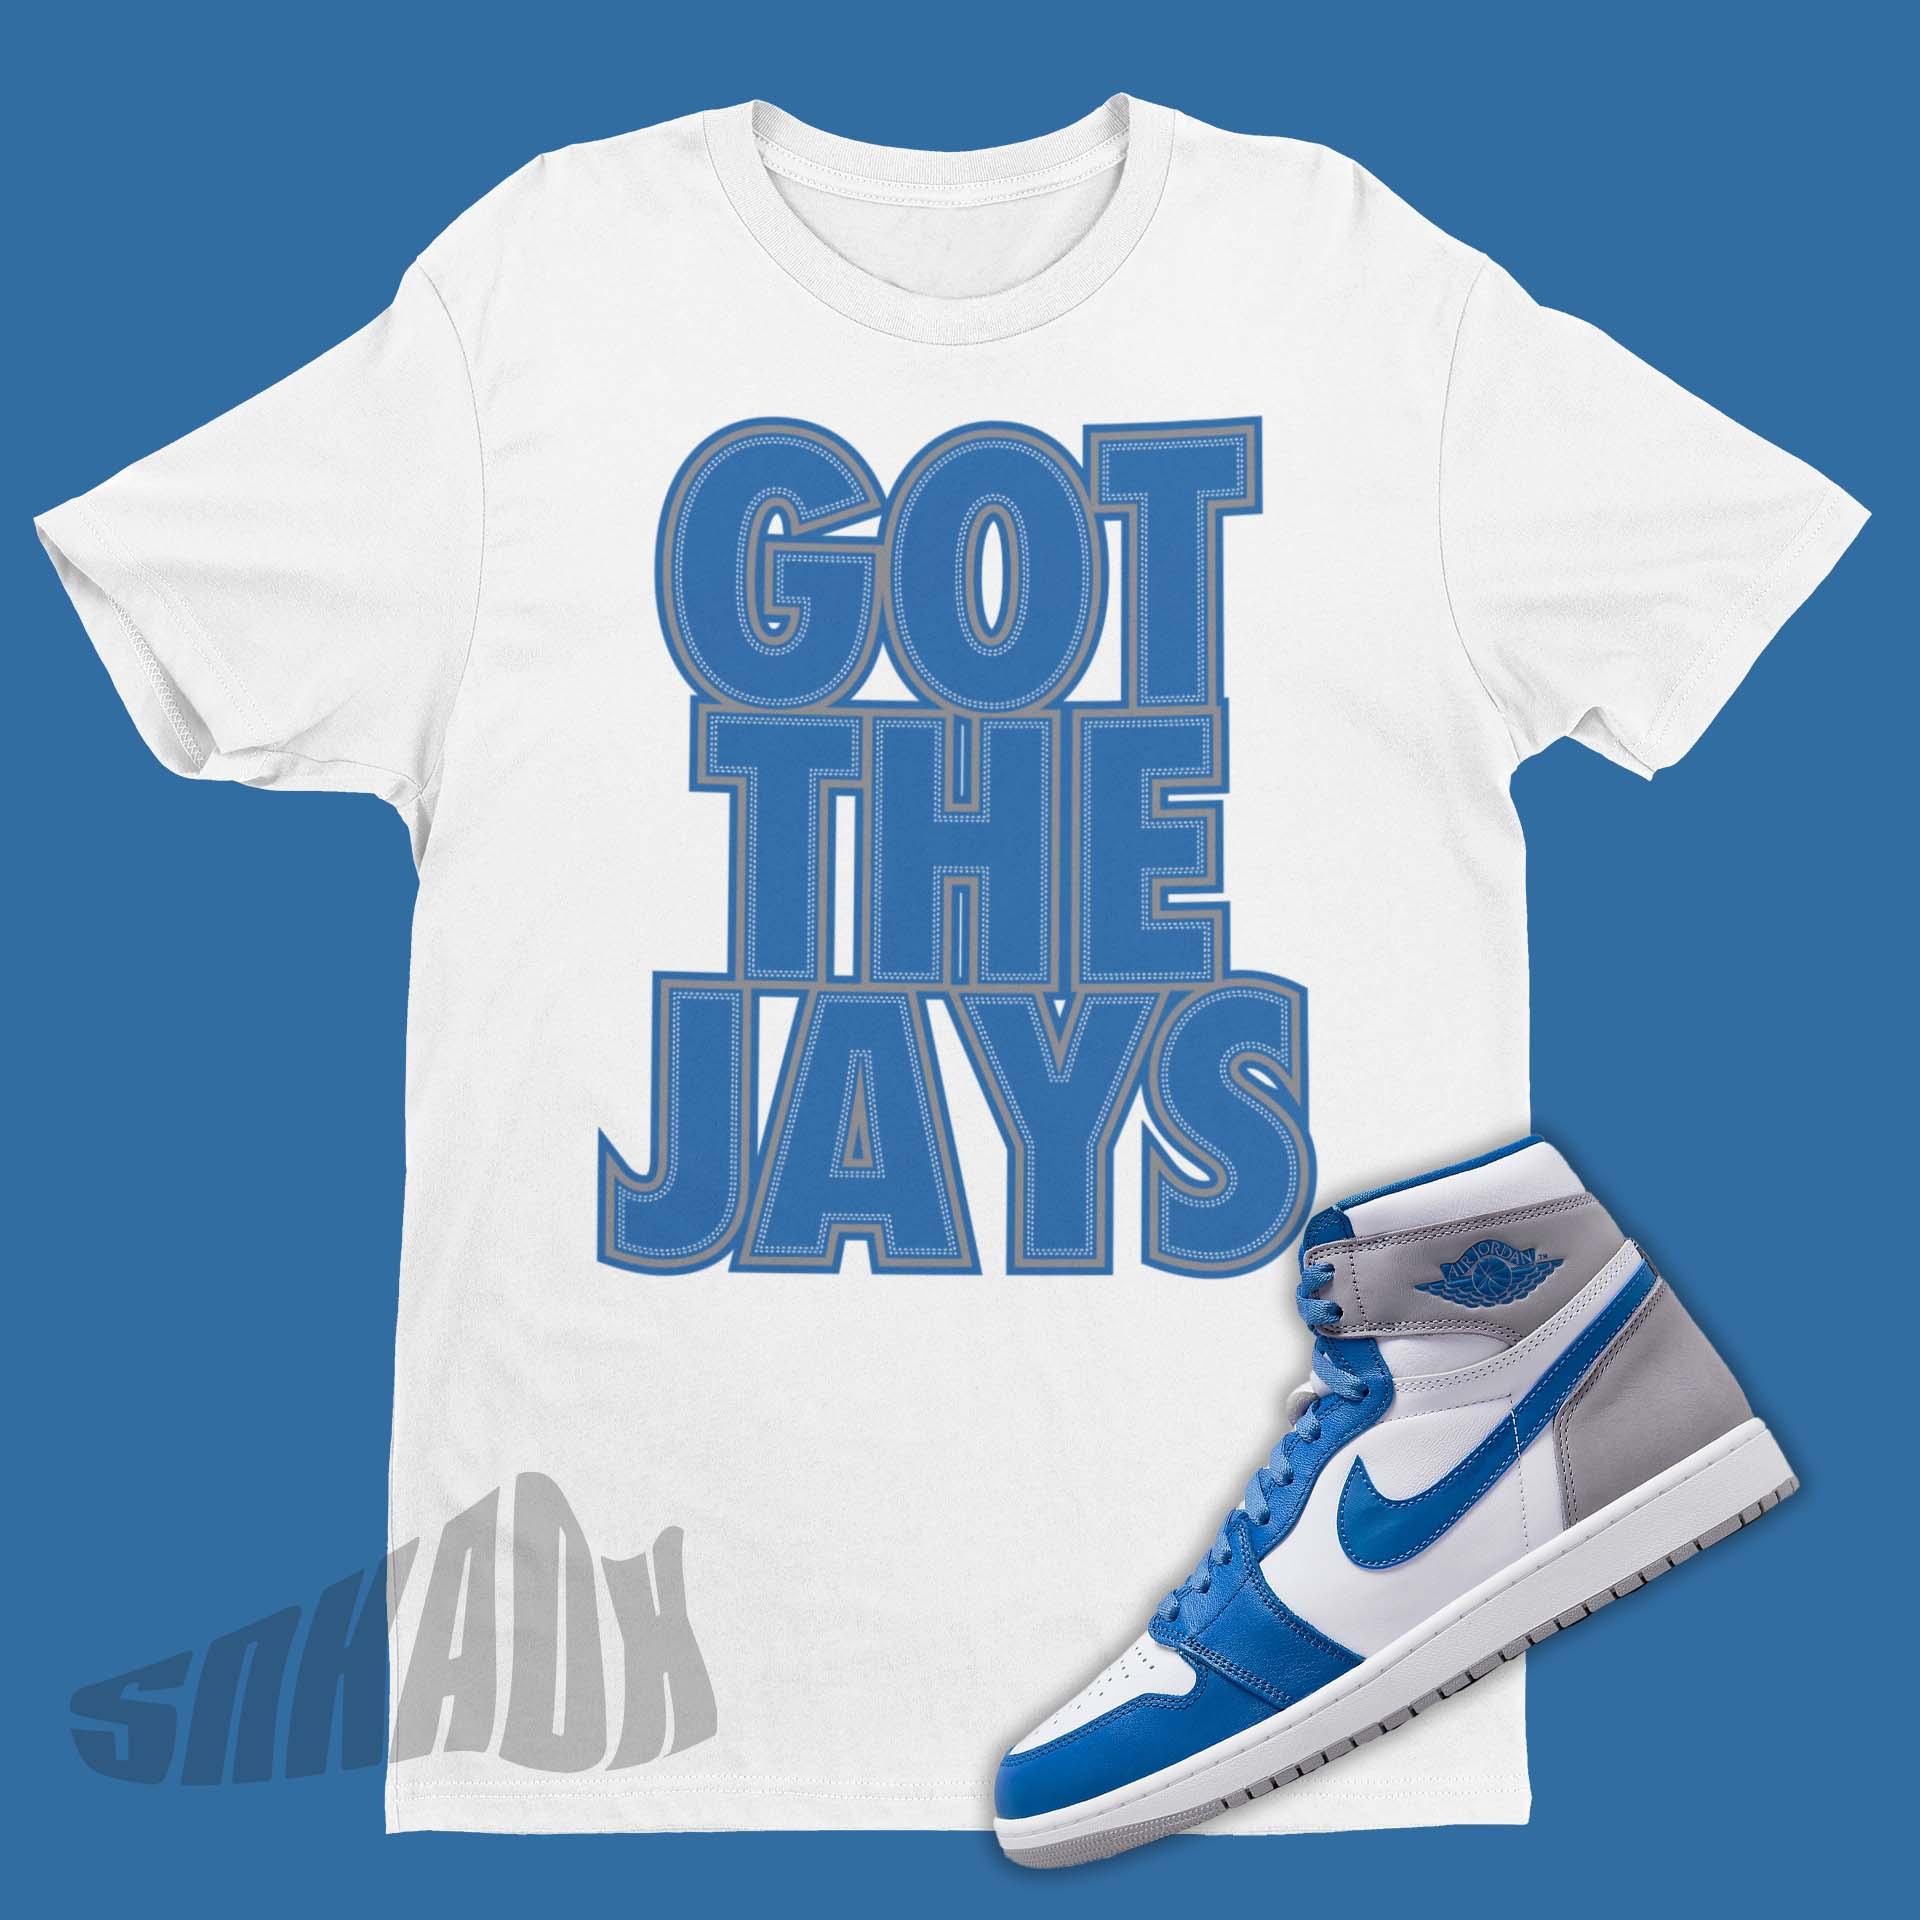 black and blue jordan outfit